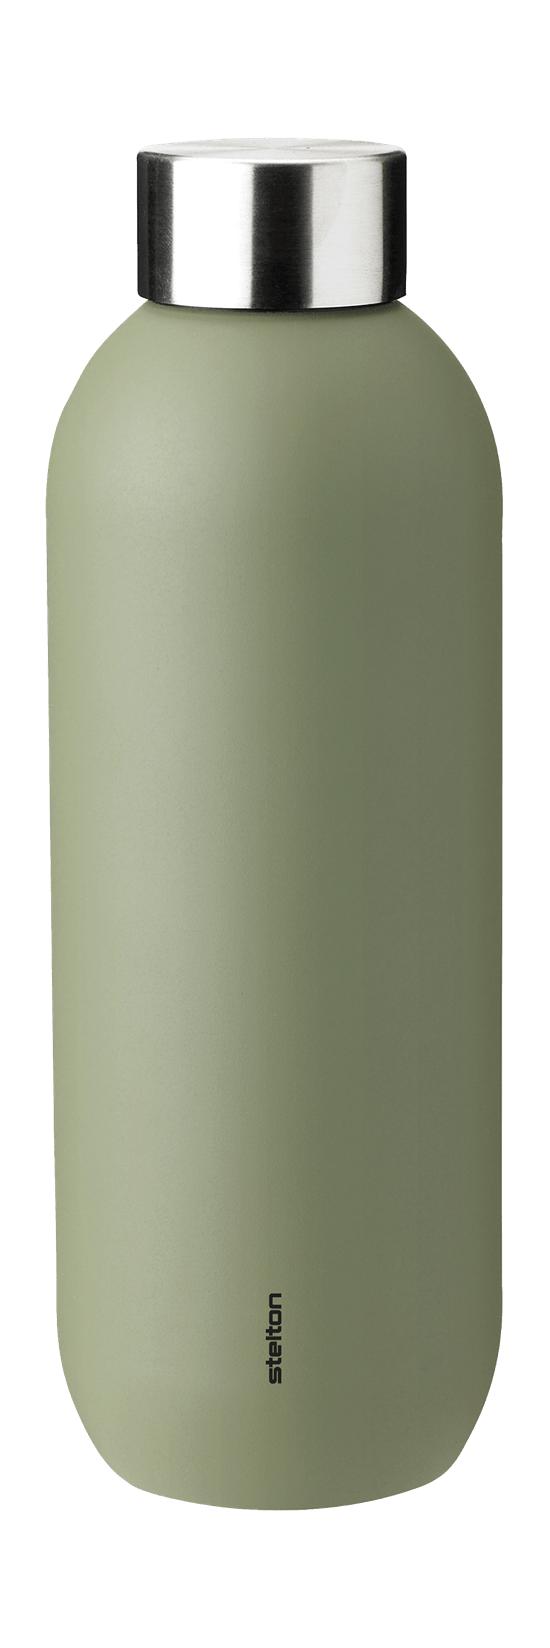 Stelton Keep Cool Termo-Flasche 0,6 L, Armee